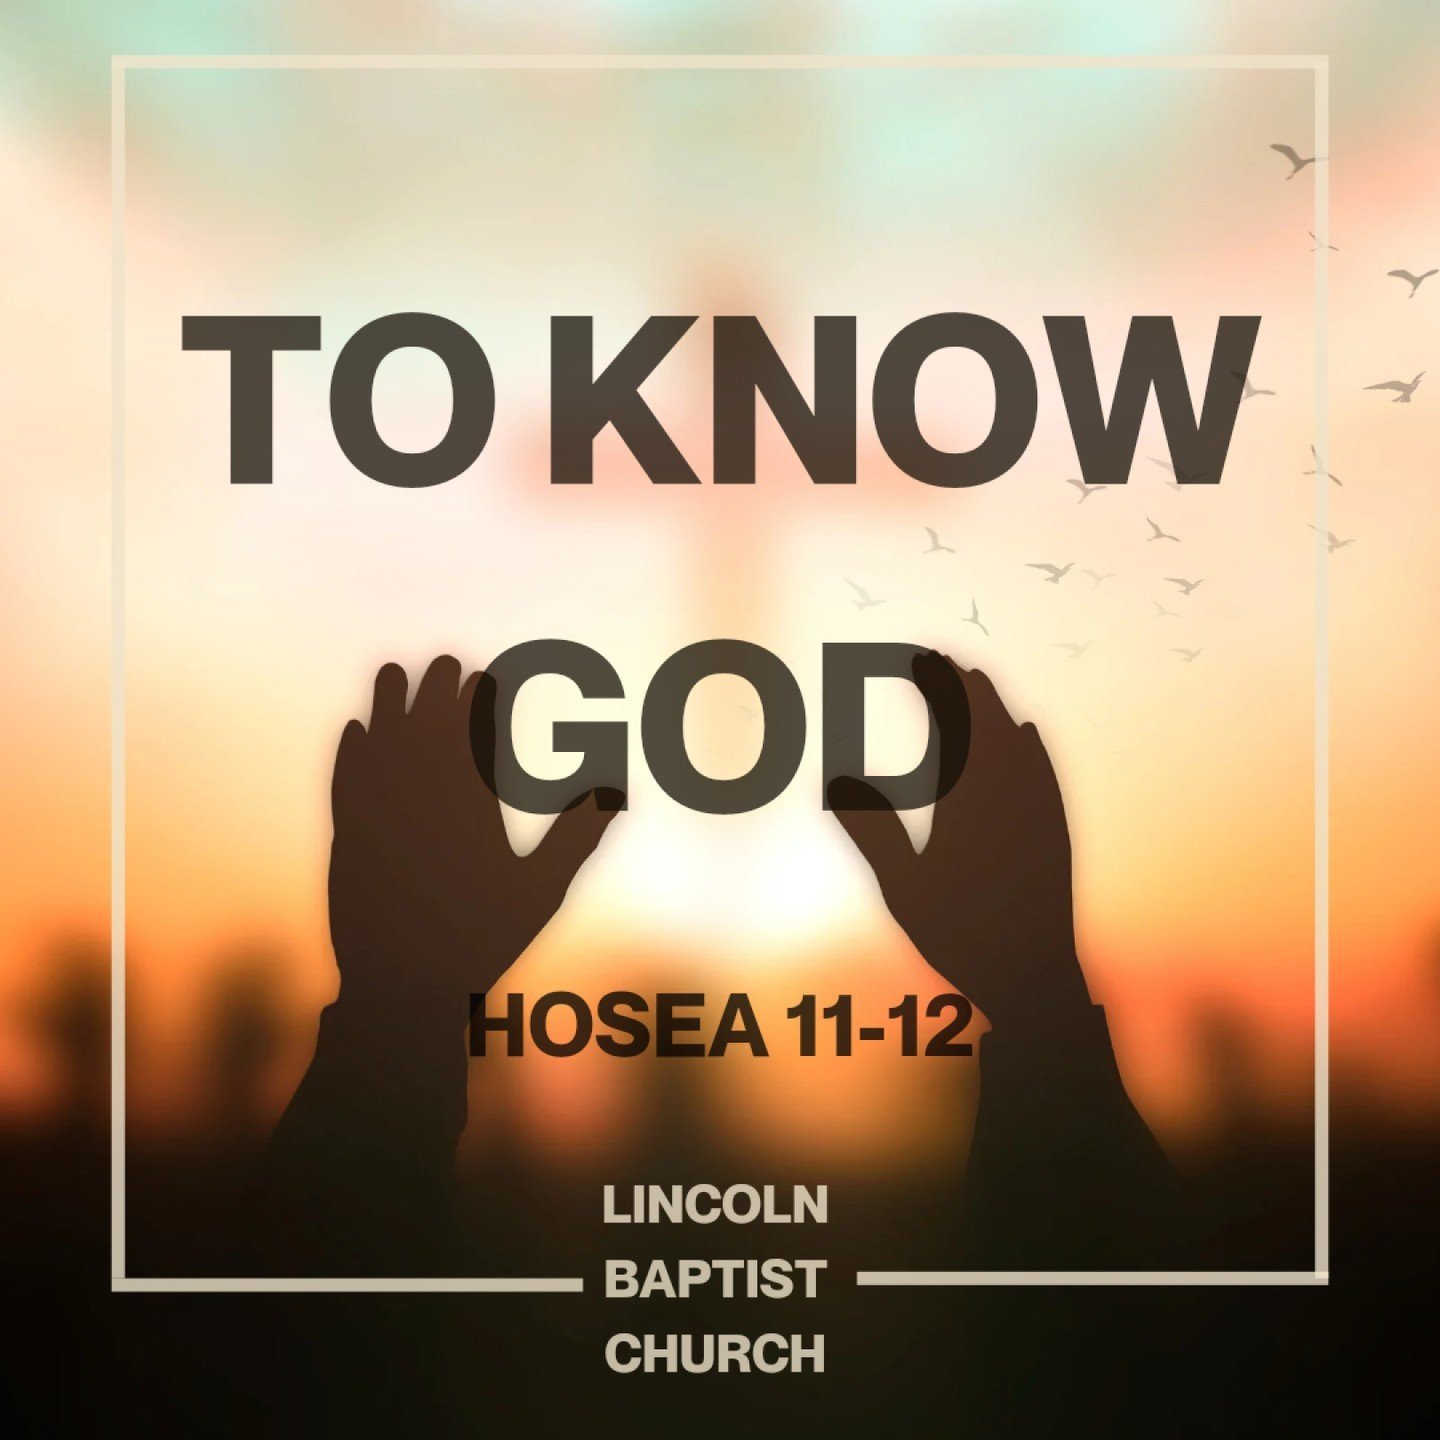 We had a wonderful morning of worship, prayer, teaching and fellowship on Sunday.  If you missed this week's sermon on Hosea 11-12 brought to us by our Pastor, Daniel, don't worry! You can catch up on it by visiting our website, SoundCloud or Spotify